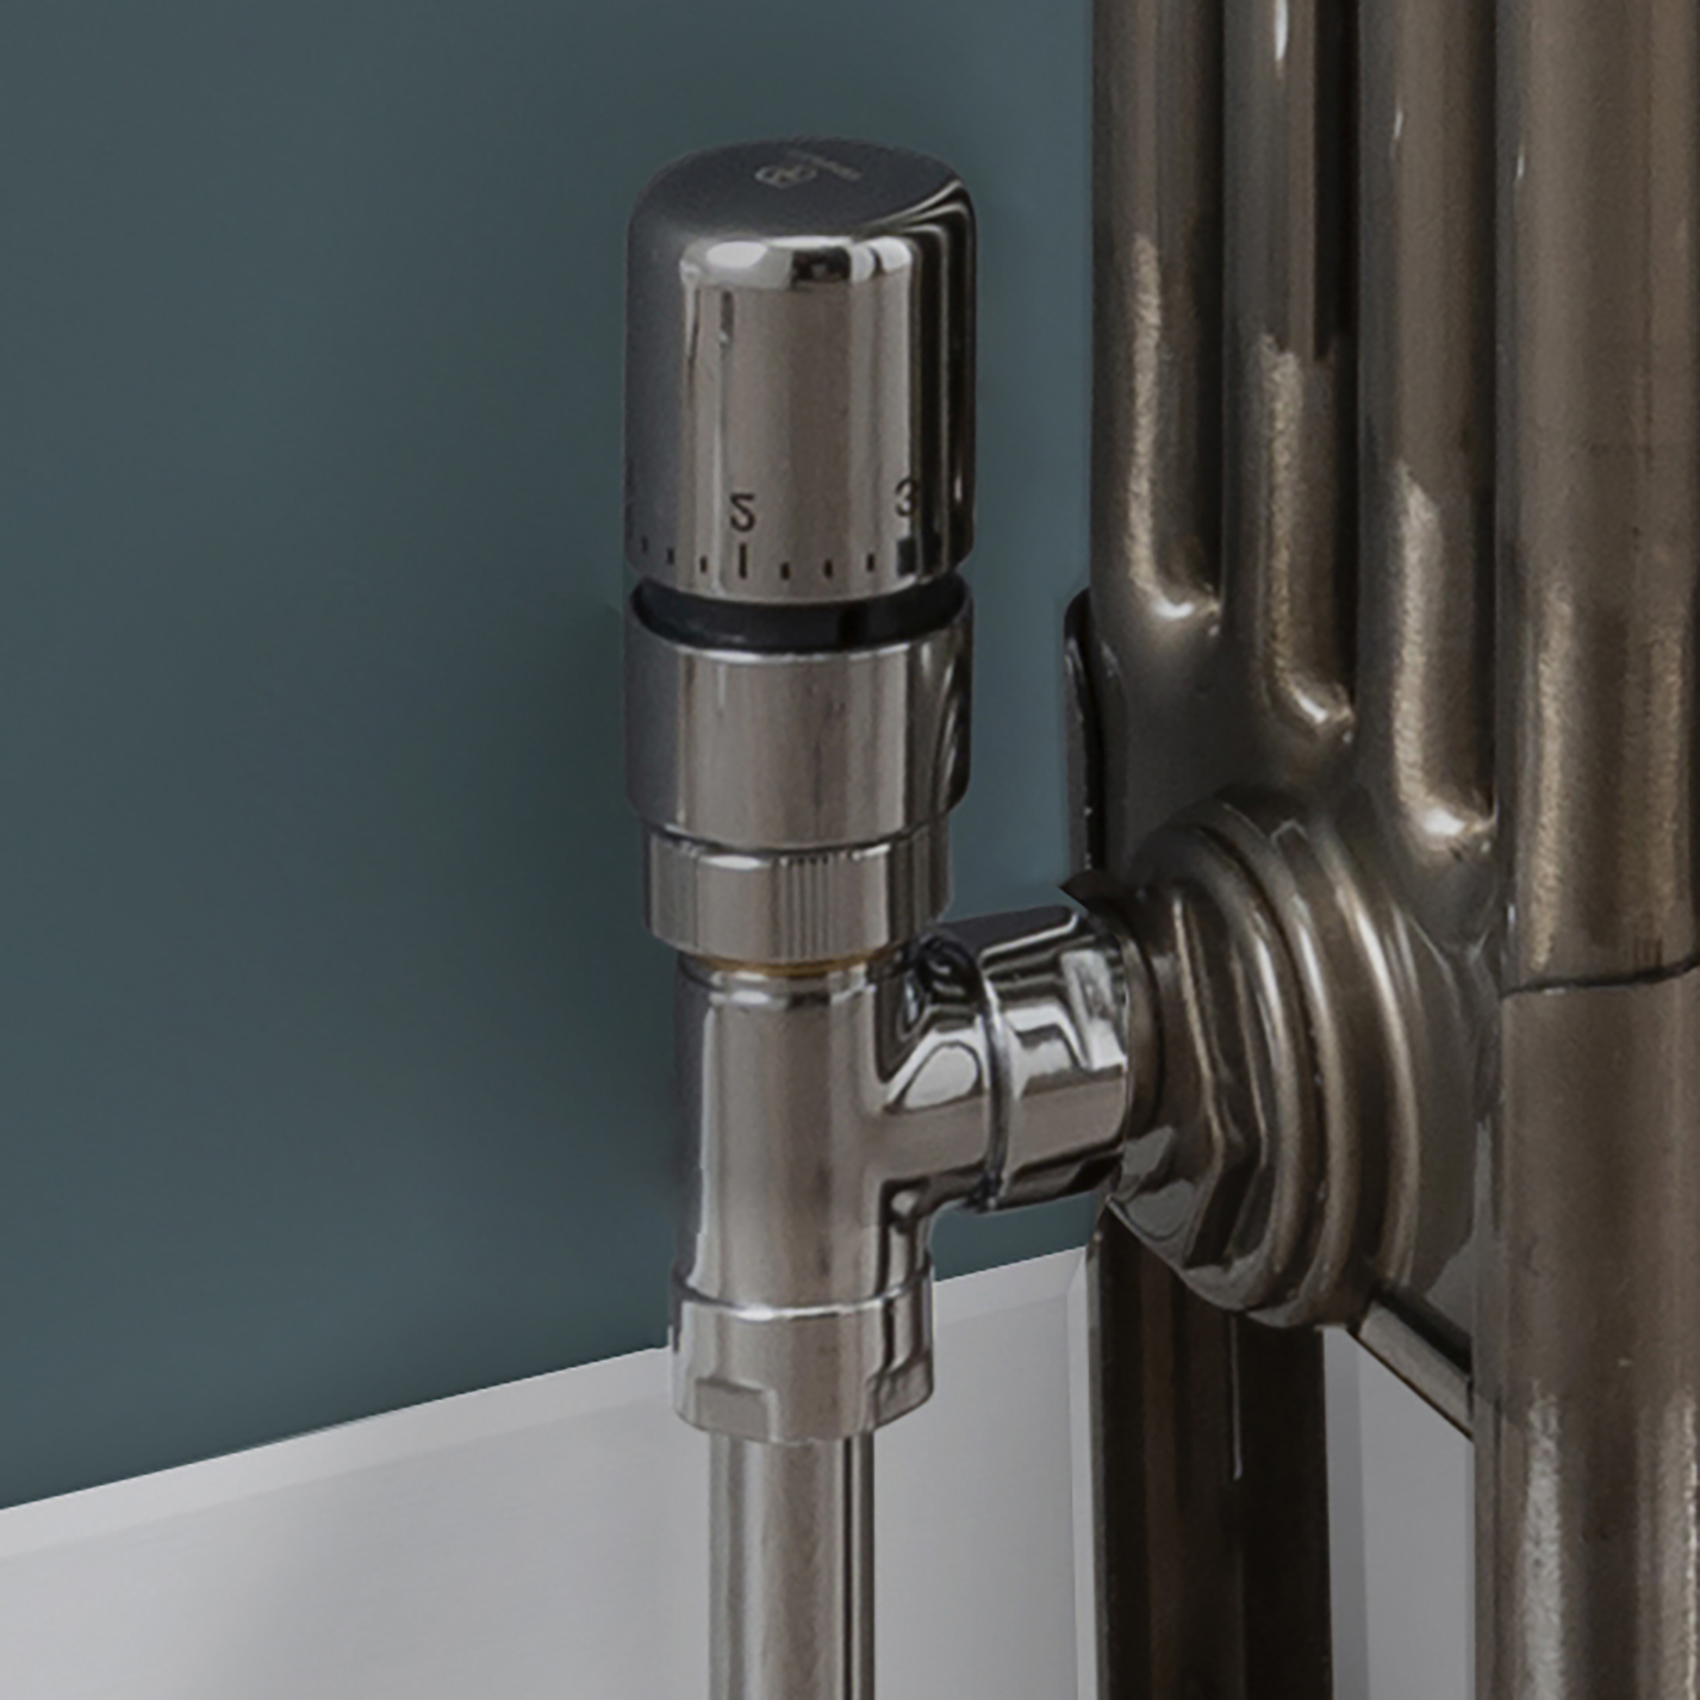 Image Highly cost Efficient and Stylish valves the Best Choice for Your Heating Needs